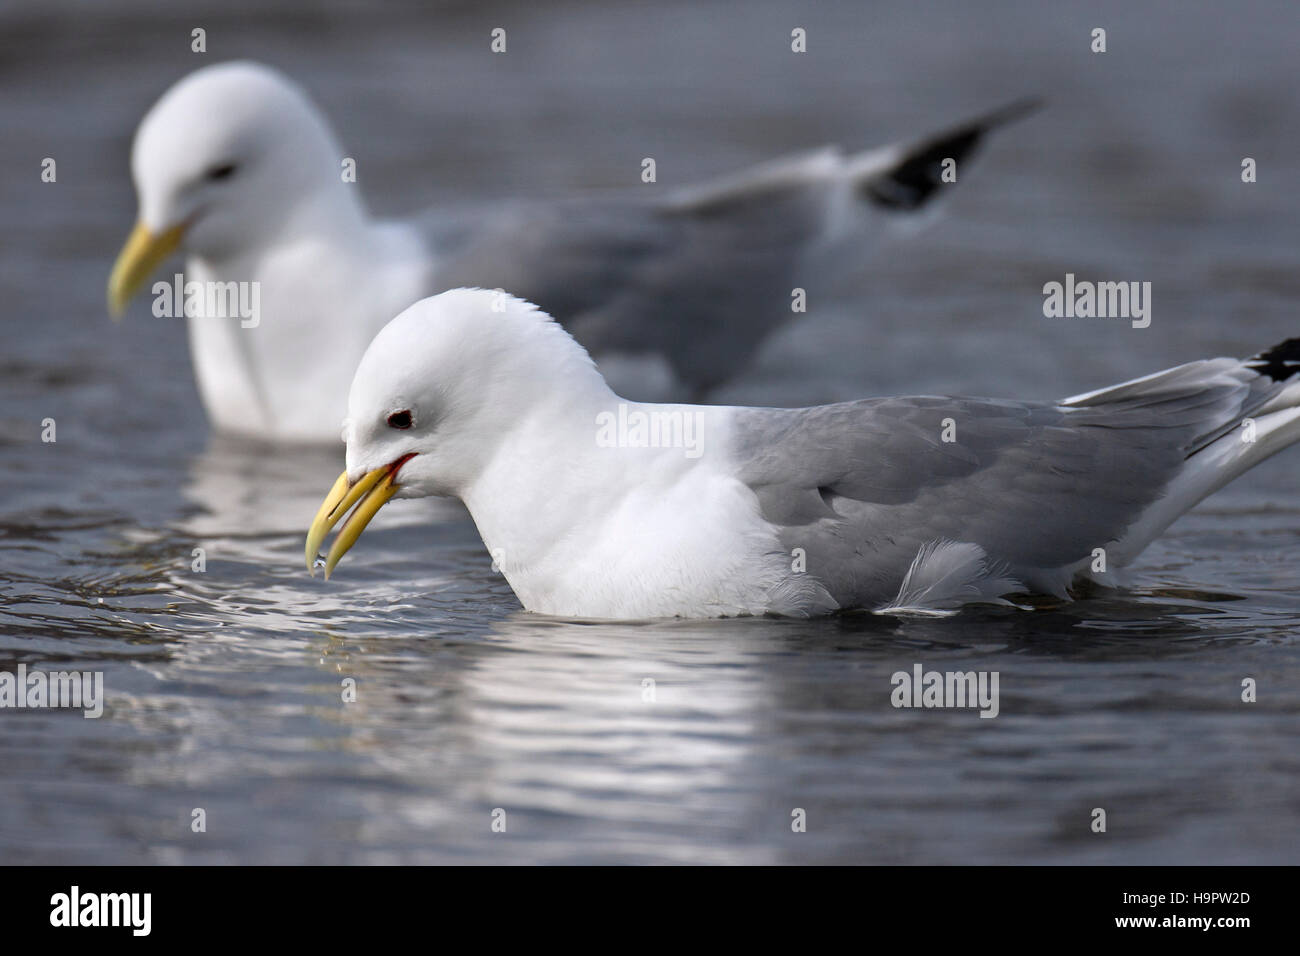 Black-legged kittiwakes (Rissa tridactyla) swimming and picking up food from water's surface at sea Stock Photo